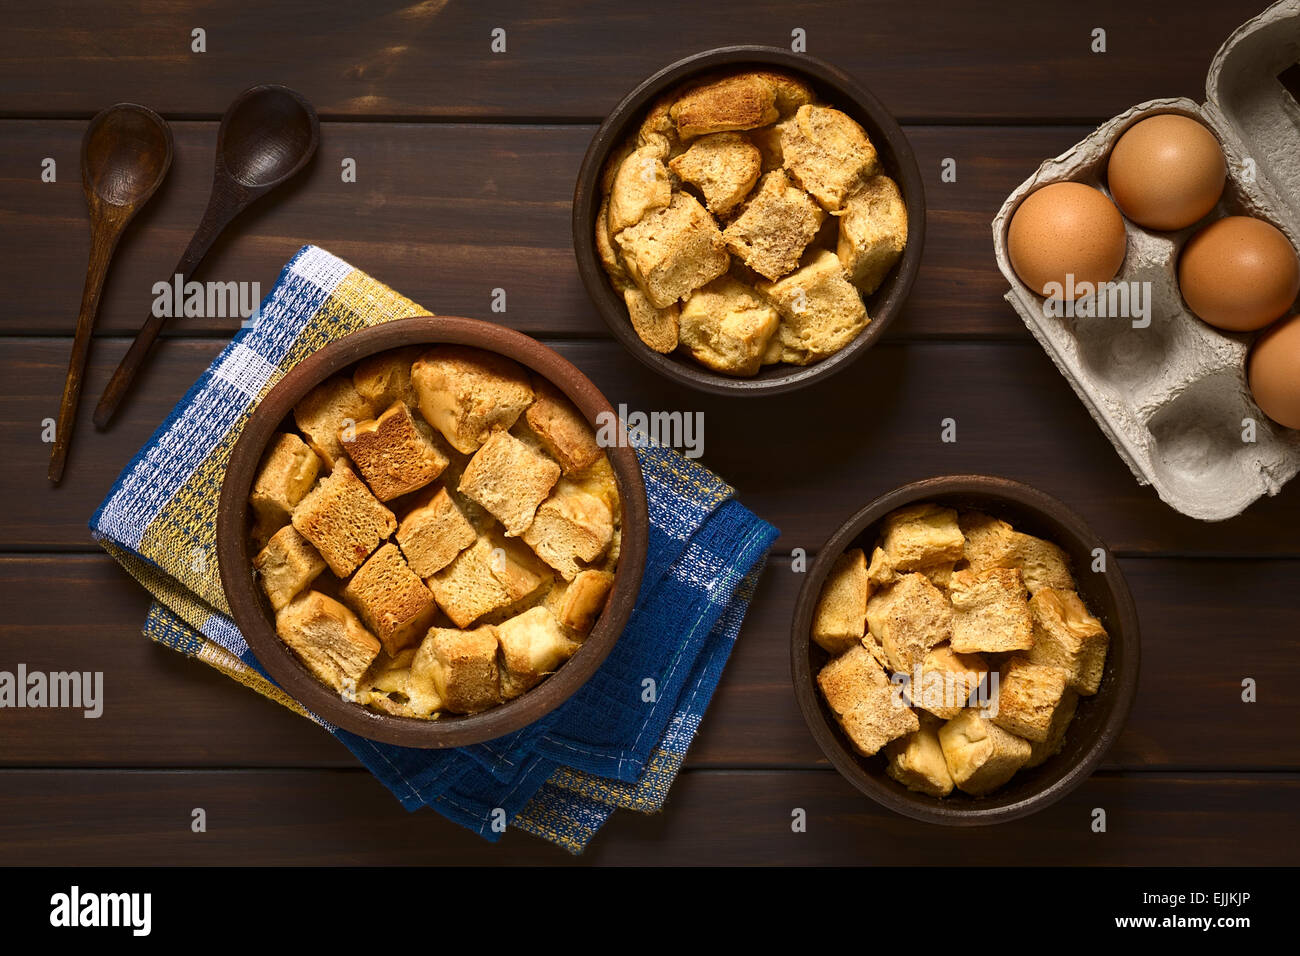 Overhead shot of three rustic bowls of bread pudding made of diced stale bread, milk, egg, cinnamon, sugar and butter Stock Photo